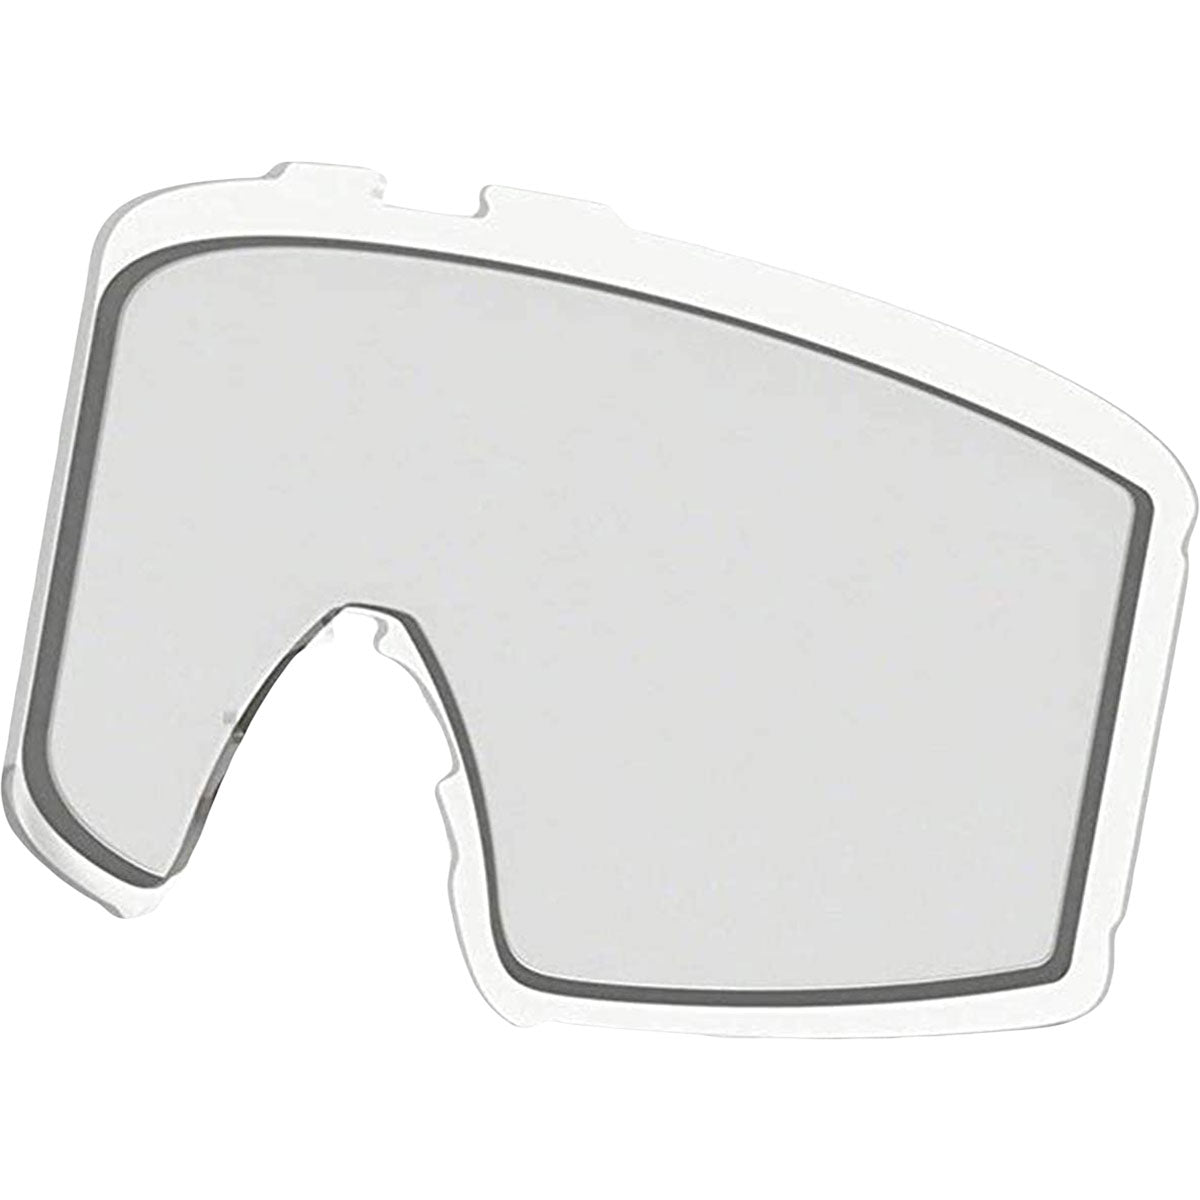 Oakley Line Miner XM Replacement Lens Goggles Accessories-102